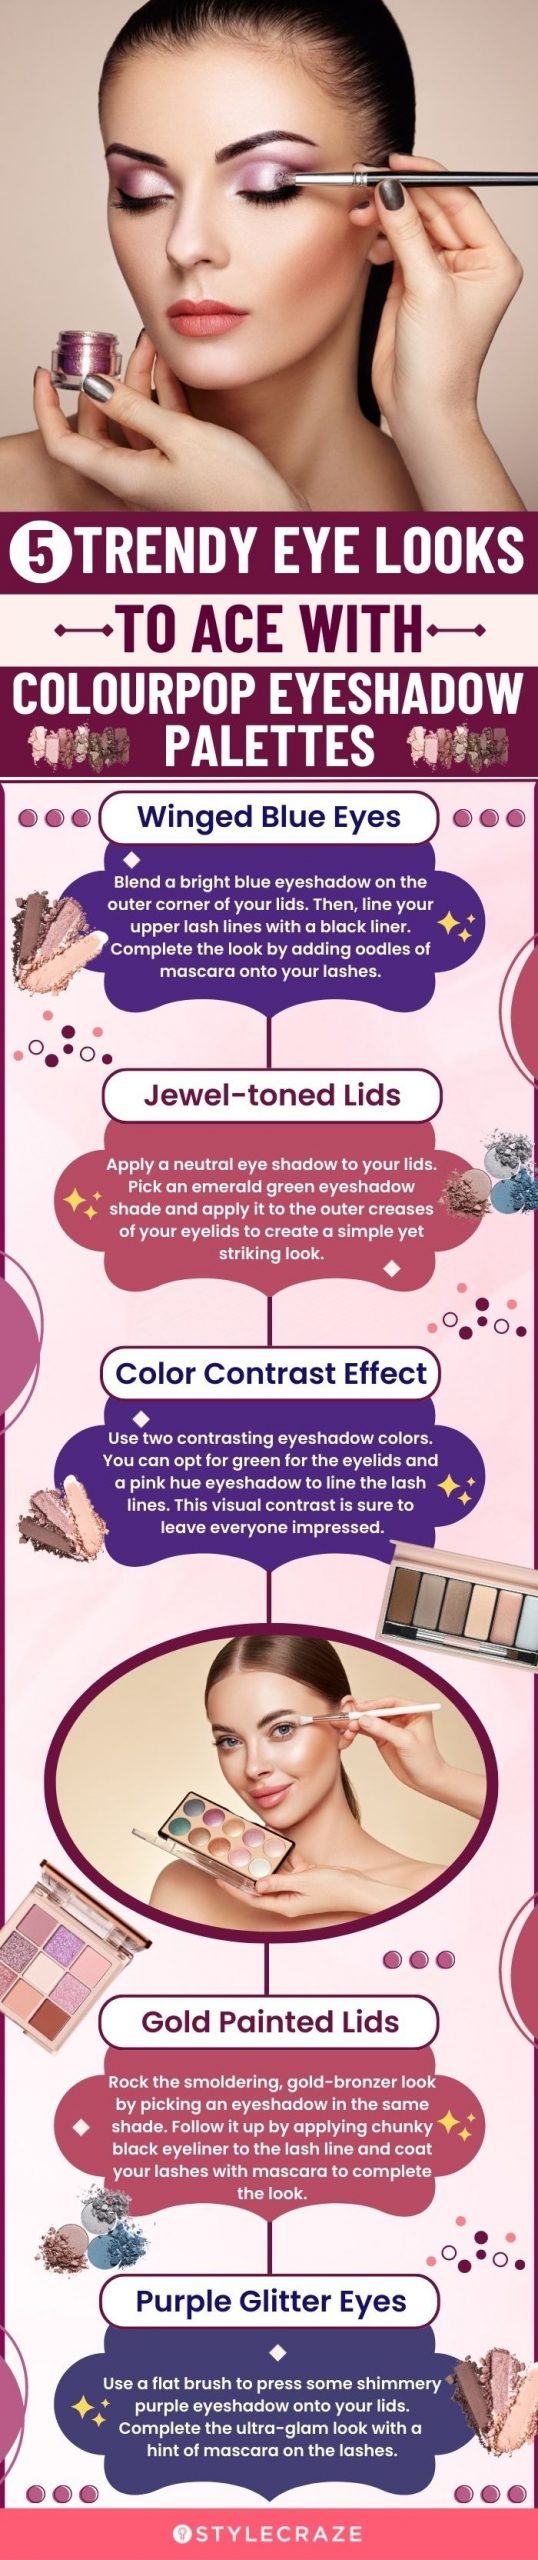  5 Trendy Eye Looks To Ace With Colourpop Eyeshadow Palettes (infographic)